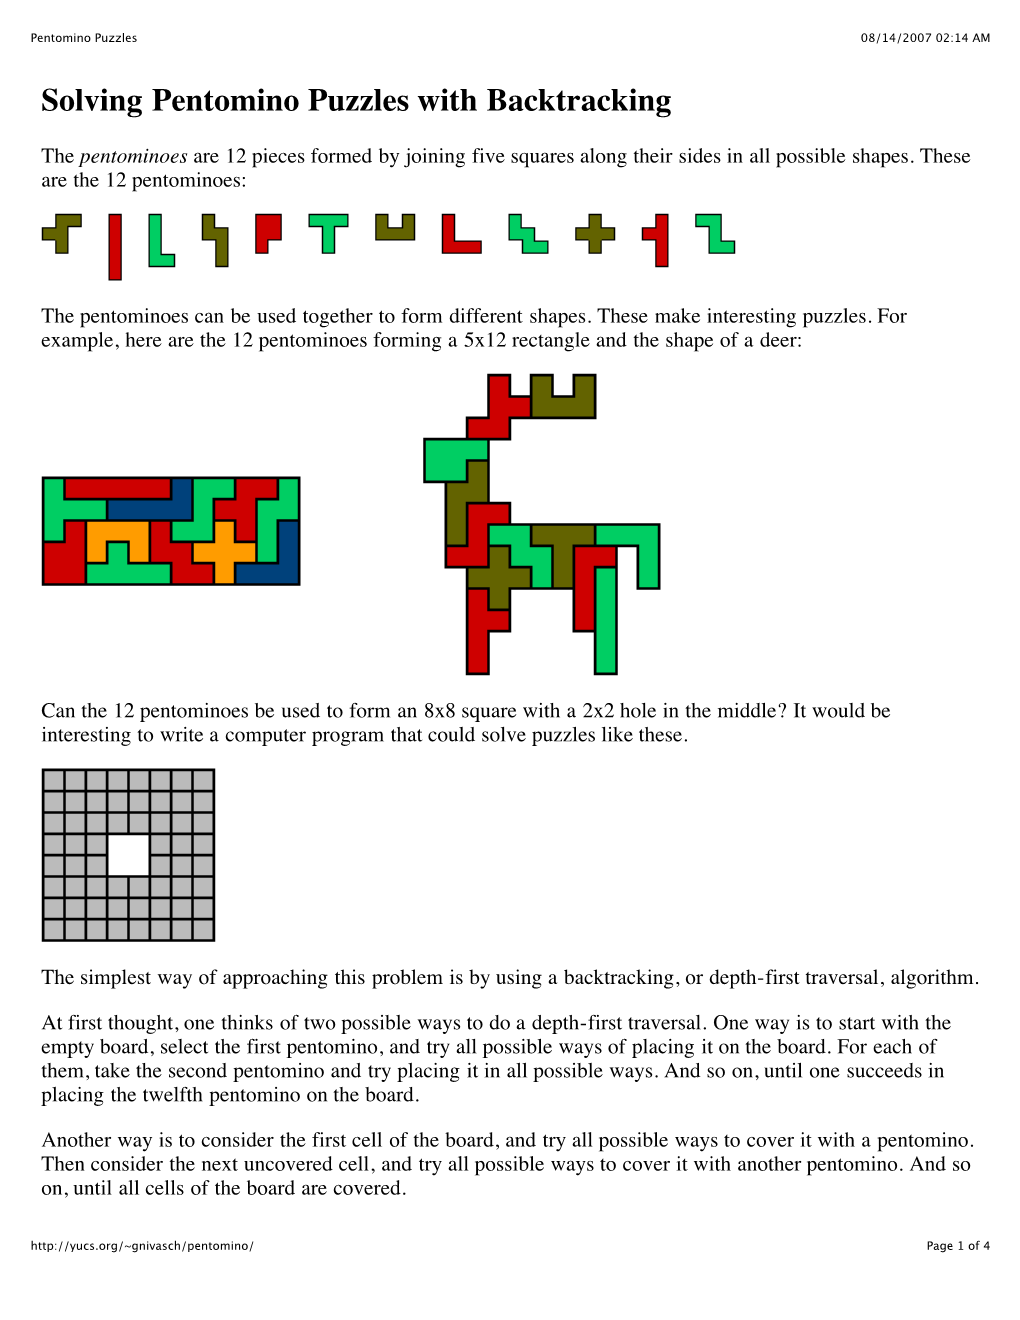 Solving Pentomino Puzzles with Backtracking